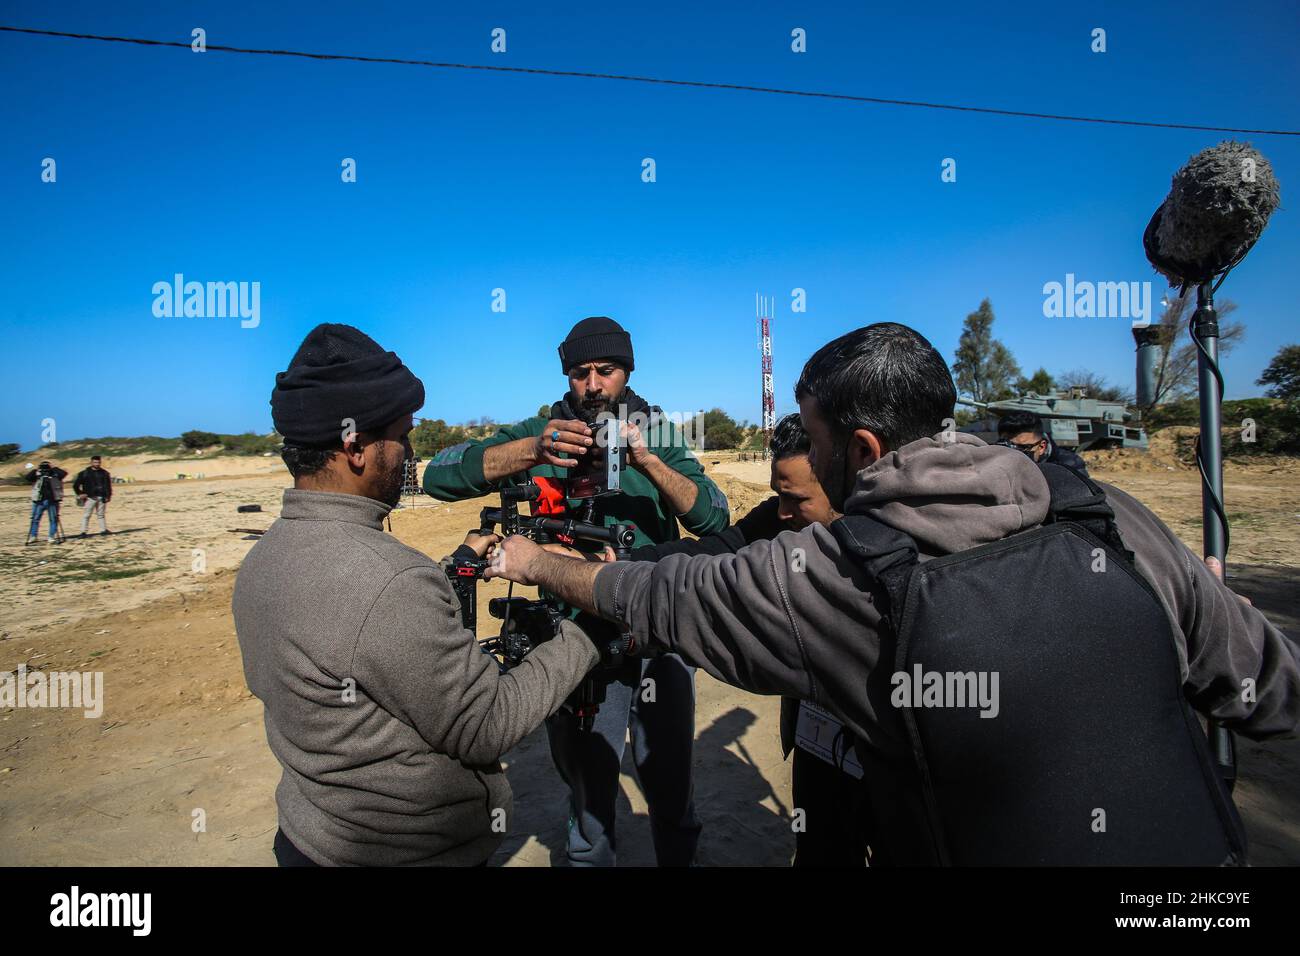 Palestinian crew prepare the camera during the shooting.A crew from Al-Aqsa TV shoots a